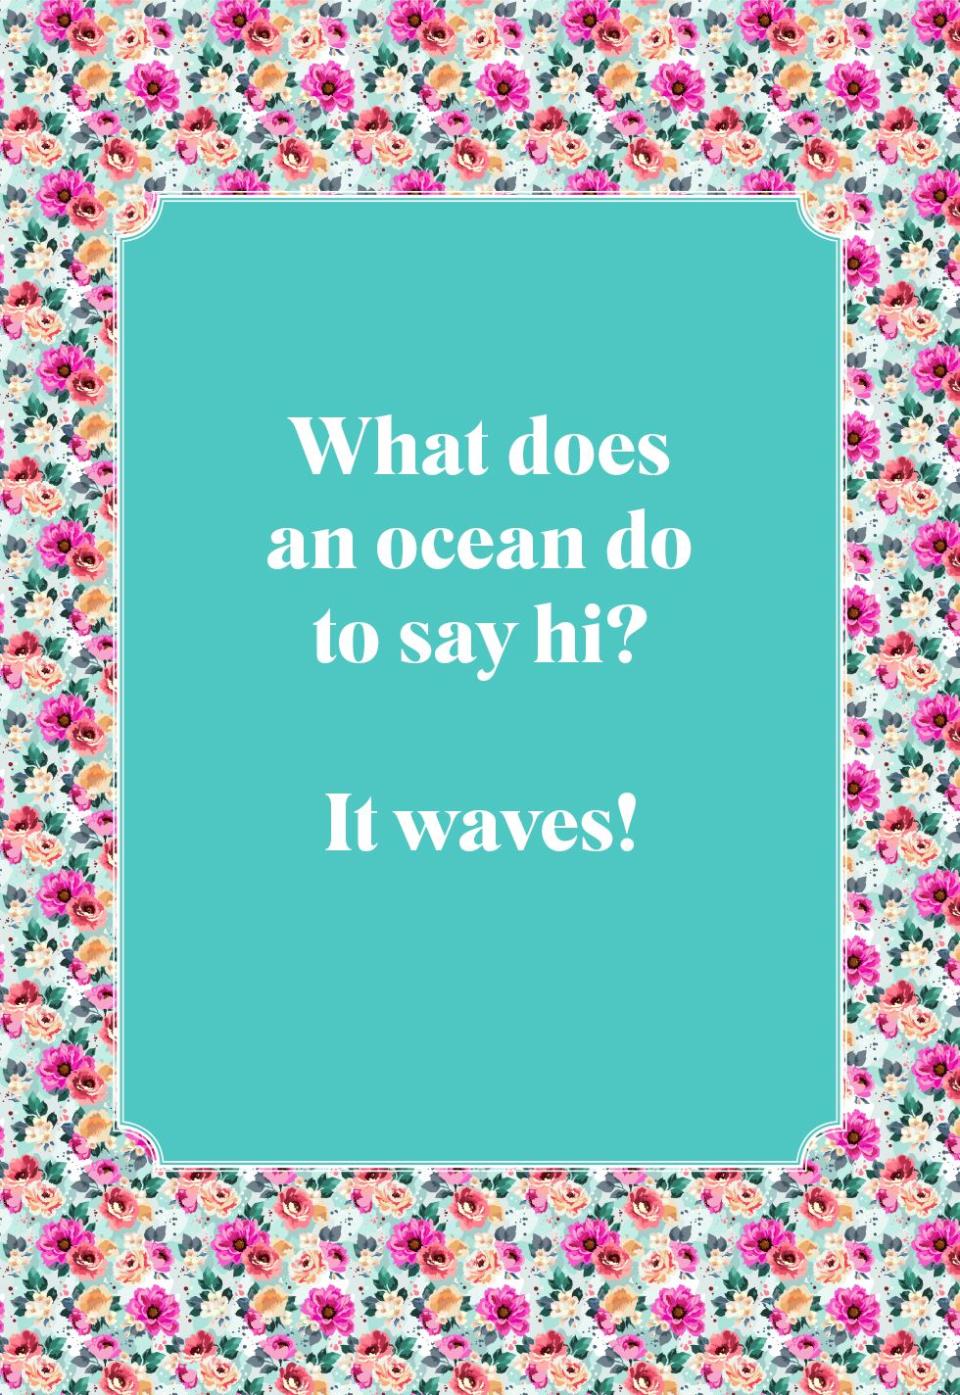 What does an ocean do to say hi?